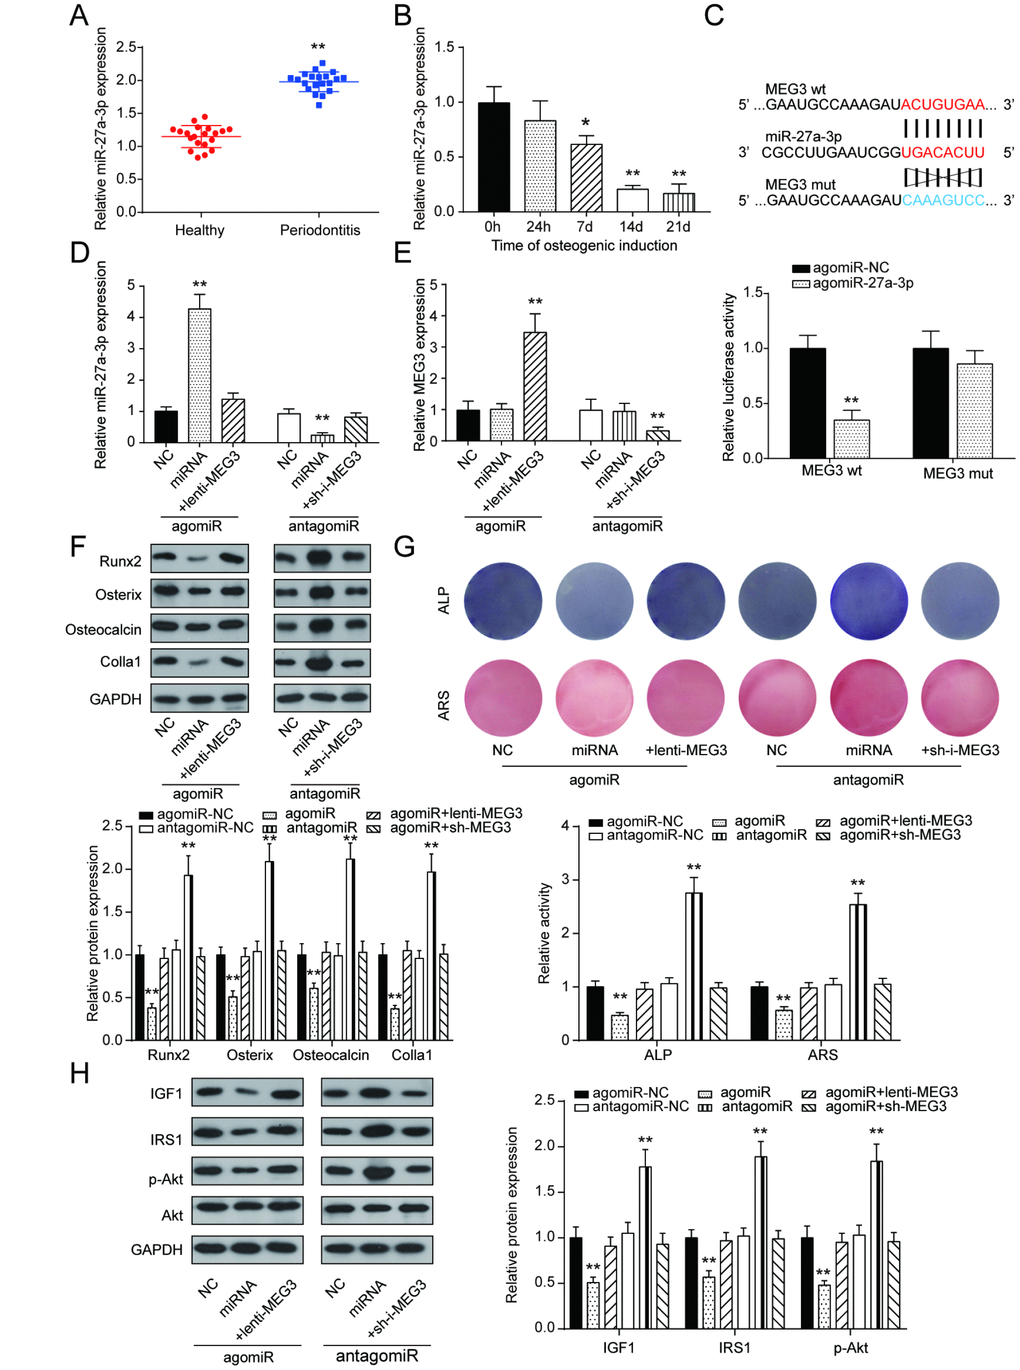 LncRNA MEG3 regulated PDLSC osteogenic differentiation through miR-27a-3p. (A) MiR-27a-3p expression in PDLSCs was up-regulated in periodontitis periodontal tissues compared with healthy periodontal tissues. (B) Expression of miR-27a-3p in 0h, 24h, 7d, 14d and 21d after osteogenic induction. (C) MiR-27a-3p directly targeted MEG3. Co-transfection of lncRNA MEG3-3’UTR-wt and agomiR-27a-3p significantly reduced relative luciferase activity. (D) Expression of miR-27a-3p in group of agomiR-27a-3p or antagomiR-27a-3p transfection (E) Expression of MEG3 in group of agomiR-27a-3p or antagomiR-27a-3p transfection. (F) Western blot of osteoblast makers including Runx2, Osterix, Osteocalcin and Colla1 in group of agomiR-27a-3p or antagomiR-27a-3p transfection. (G) ALP and Alizarin Red staining of osteogenic activities in the agomiR-27a-3p group and antagomiR-27a-3p group. (H) Protein expression of certain genes in PI3k/Akt signaling pathway, including IGF1, IRS1, p-Akt, and Akt. ** P 